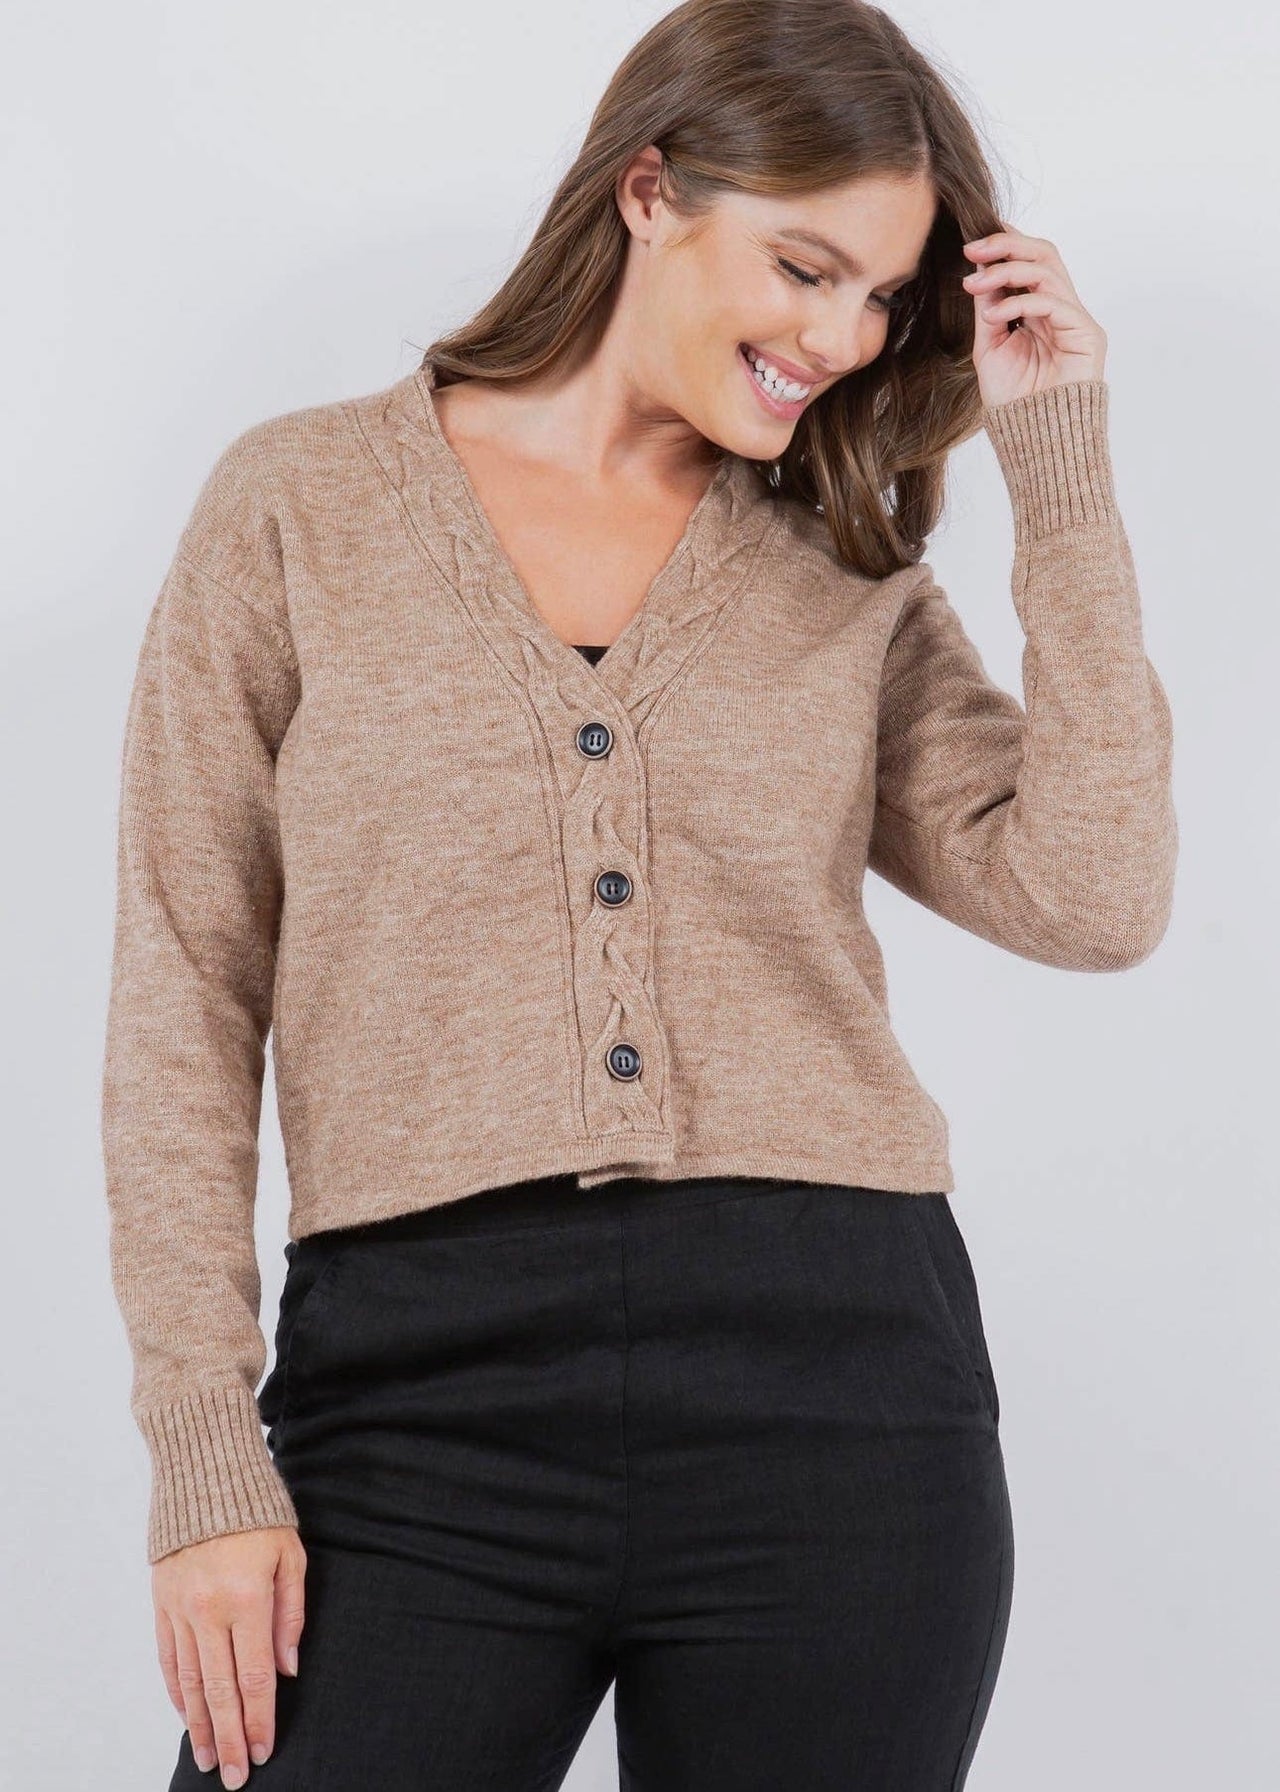 Cardigan with Cable Knit Placket Mattie B's Gifts & Apparel